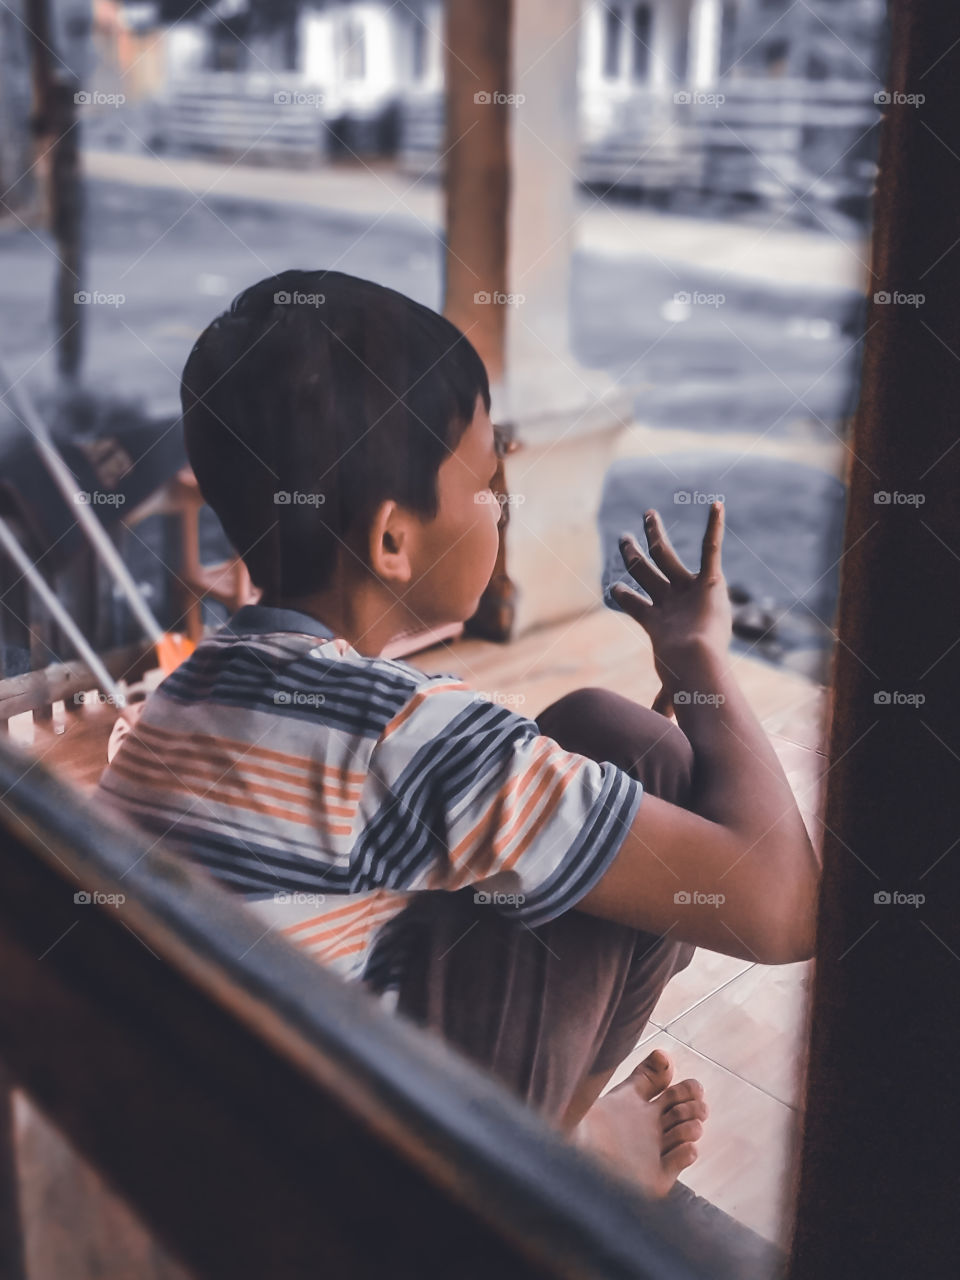 Bengkulu, Indonesia - july 1th, 2021 - a small child counting by hand and photographed from behind a window